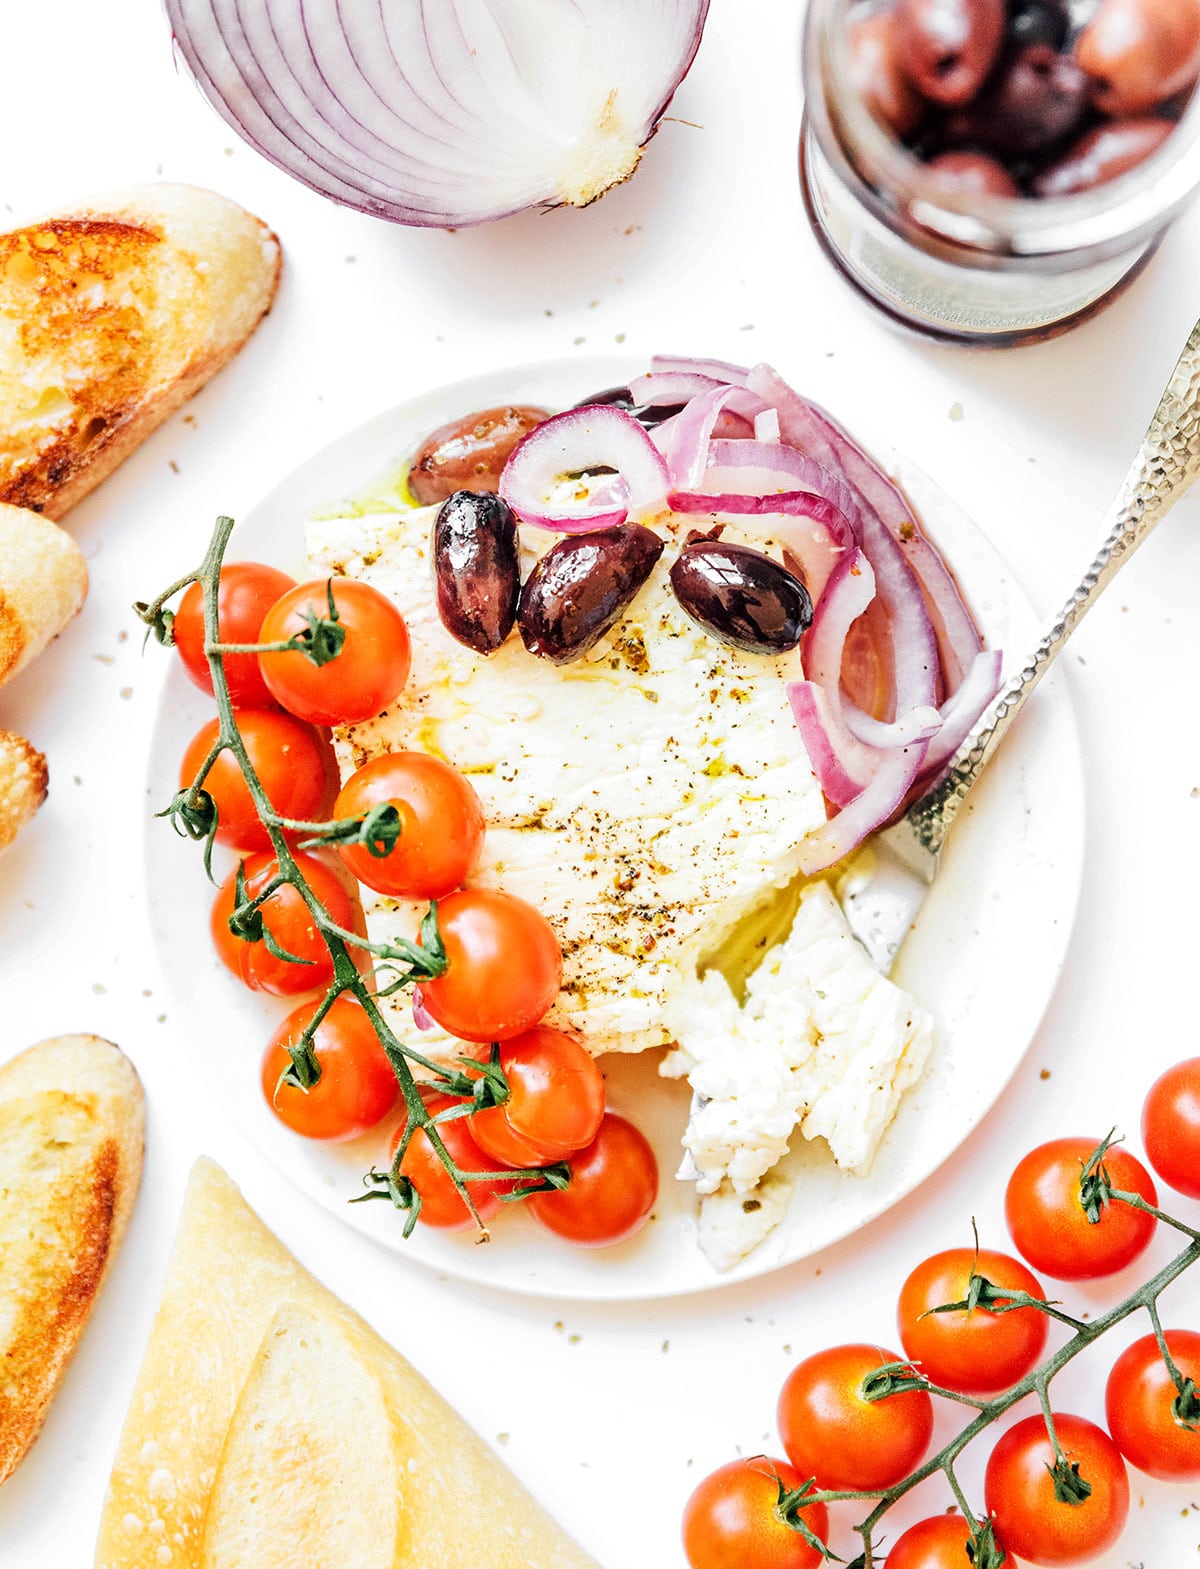 Greek baked feta on a white plate surrounded by ingredients lime tomatoes, red onion slices, and olives.